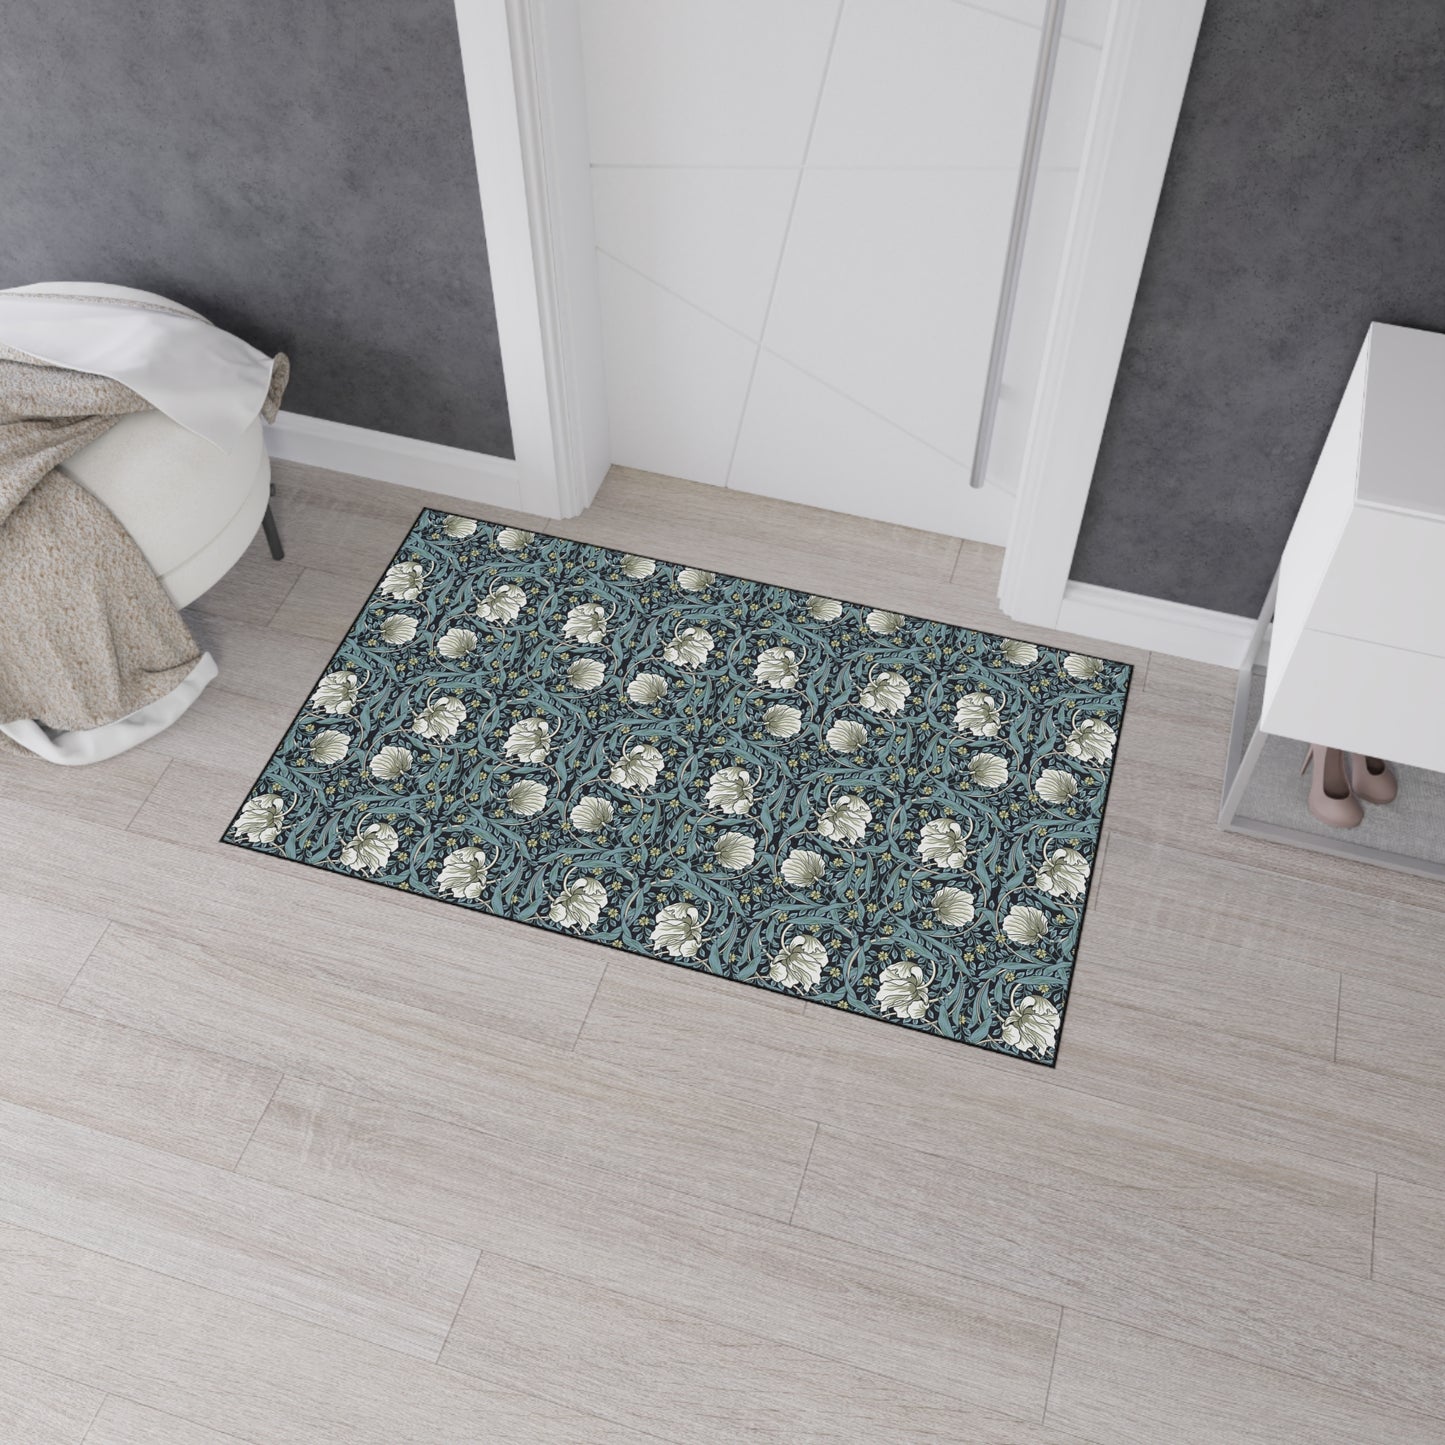 william-morris-co-heavy-duty-floor-mat-pimpernel-collection-slate-17